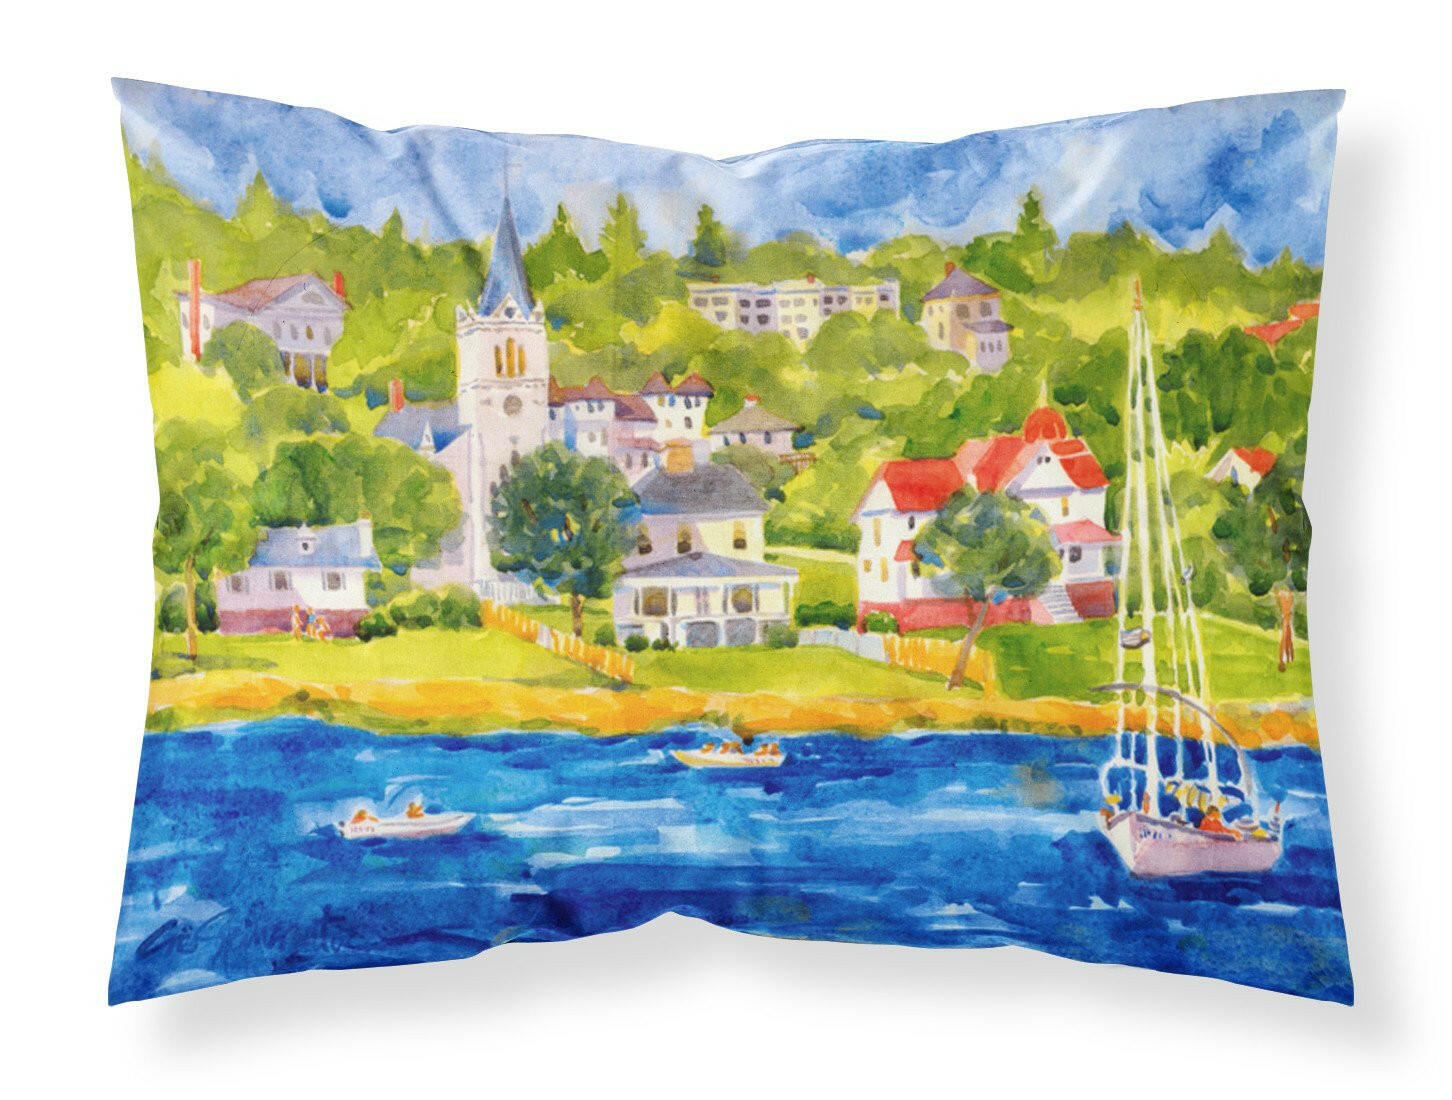 Harbour Scene with Sailboat  Moisture wicking Fabric standard pillowcase by Caroline's Treasures